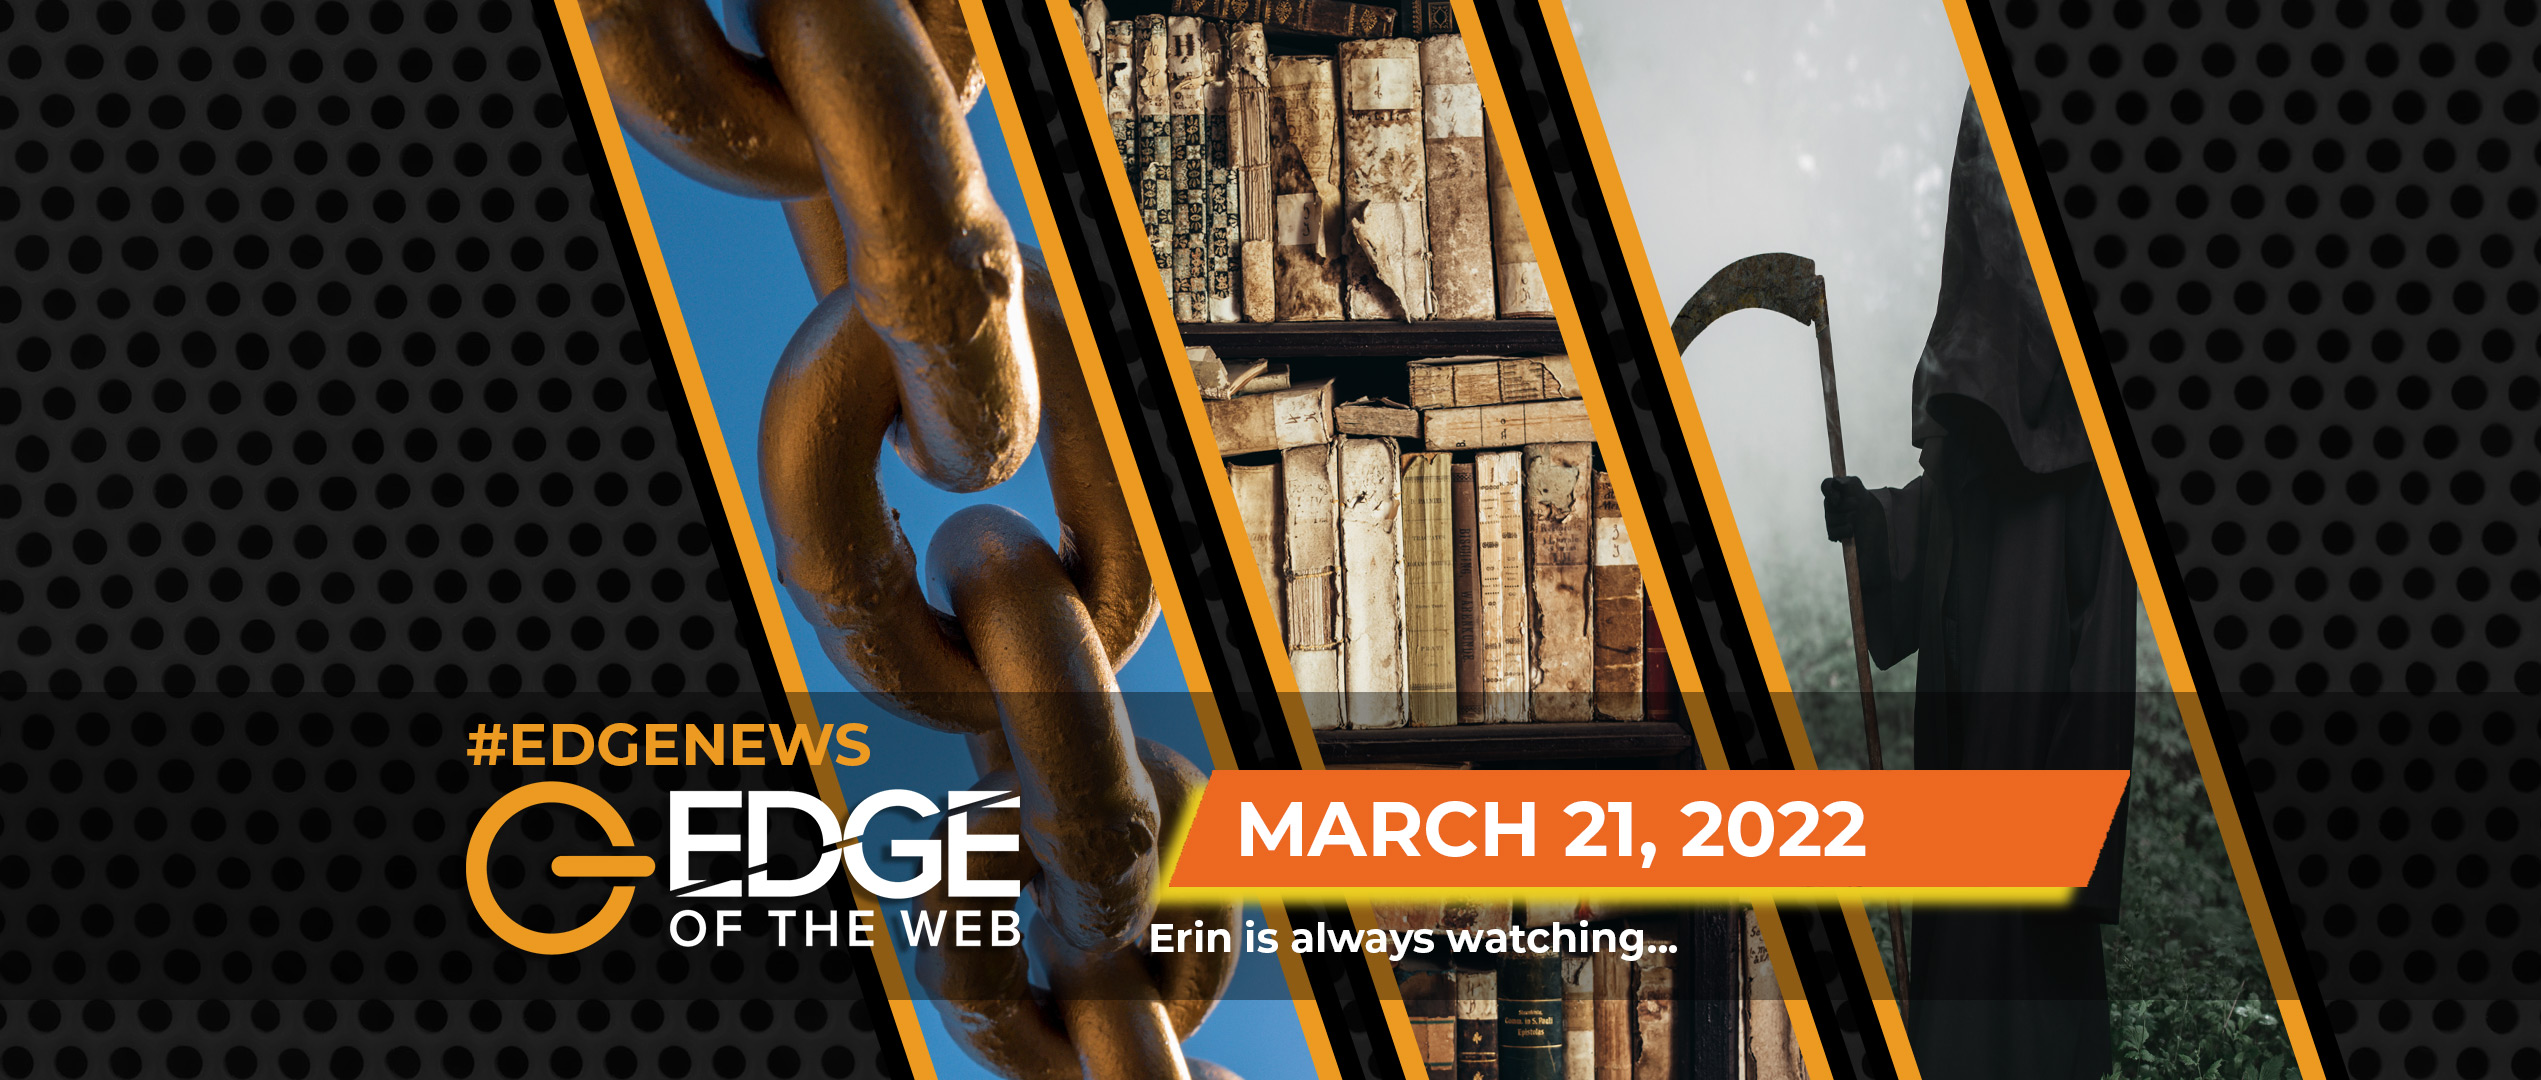 487 | News from the EDGE | Week of 3.21.2022